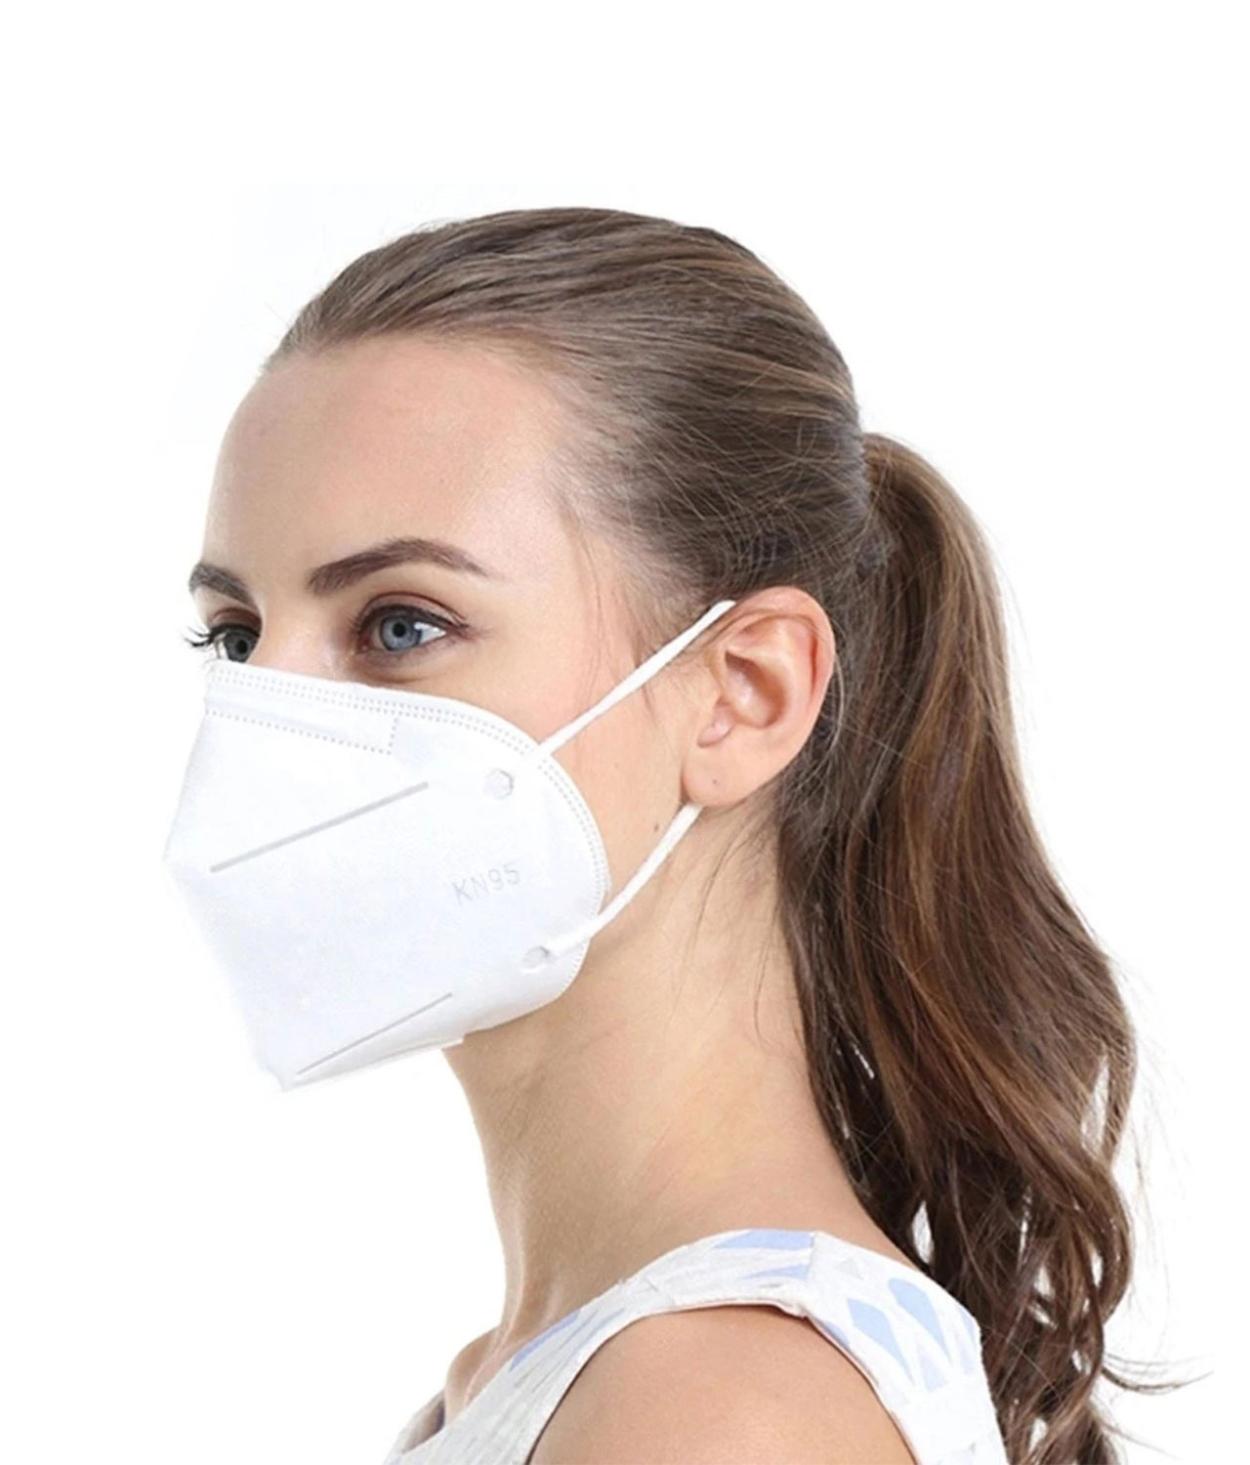 How Can We Measure And Evaluate The Effectiveness Of Face Mask Disposal Programs?